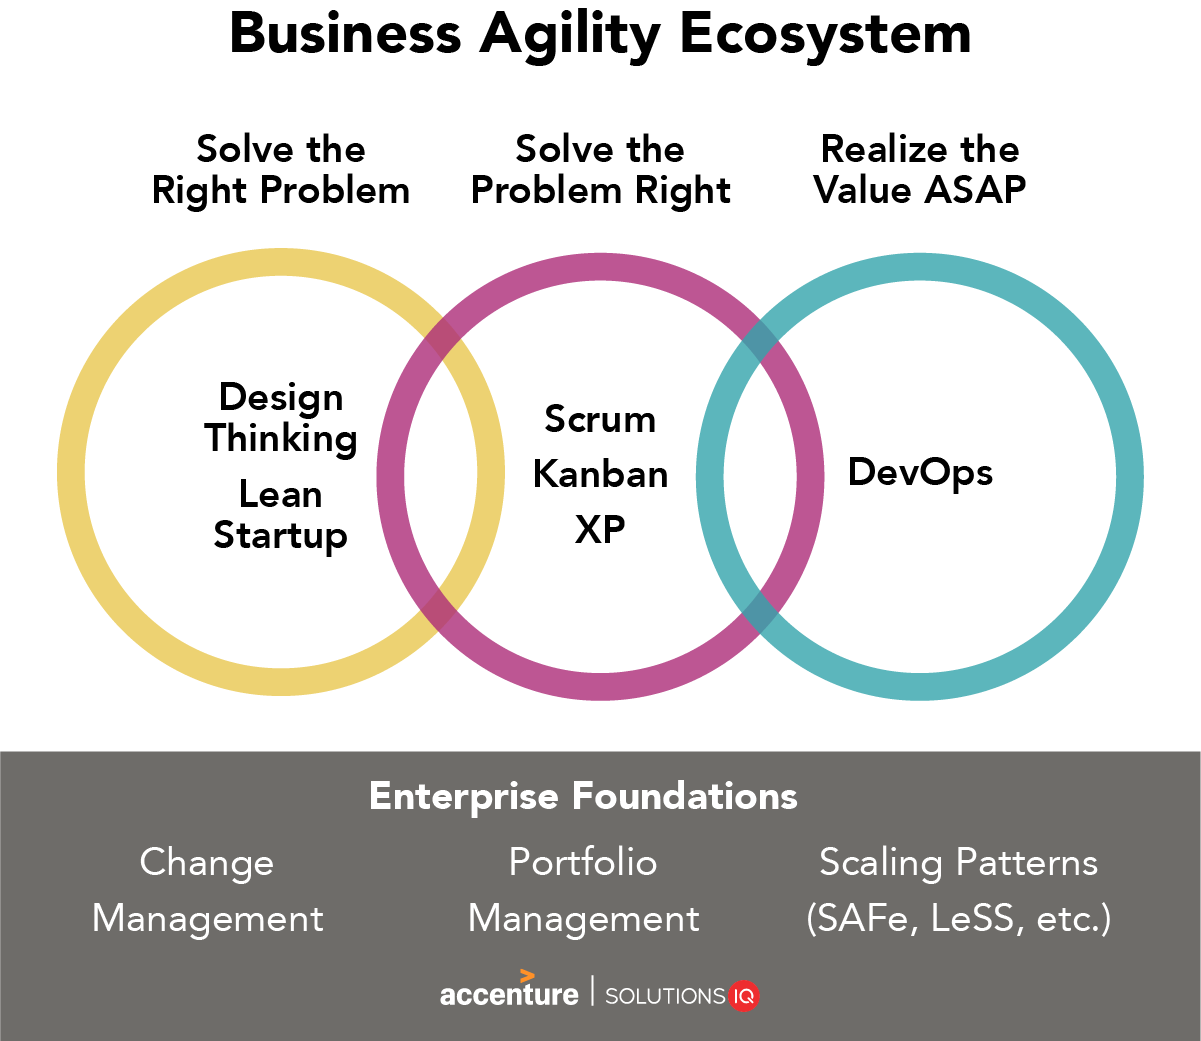 Business-Agility-Ecosystem-01.png